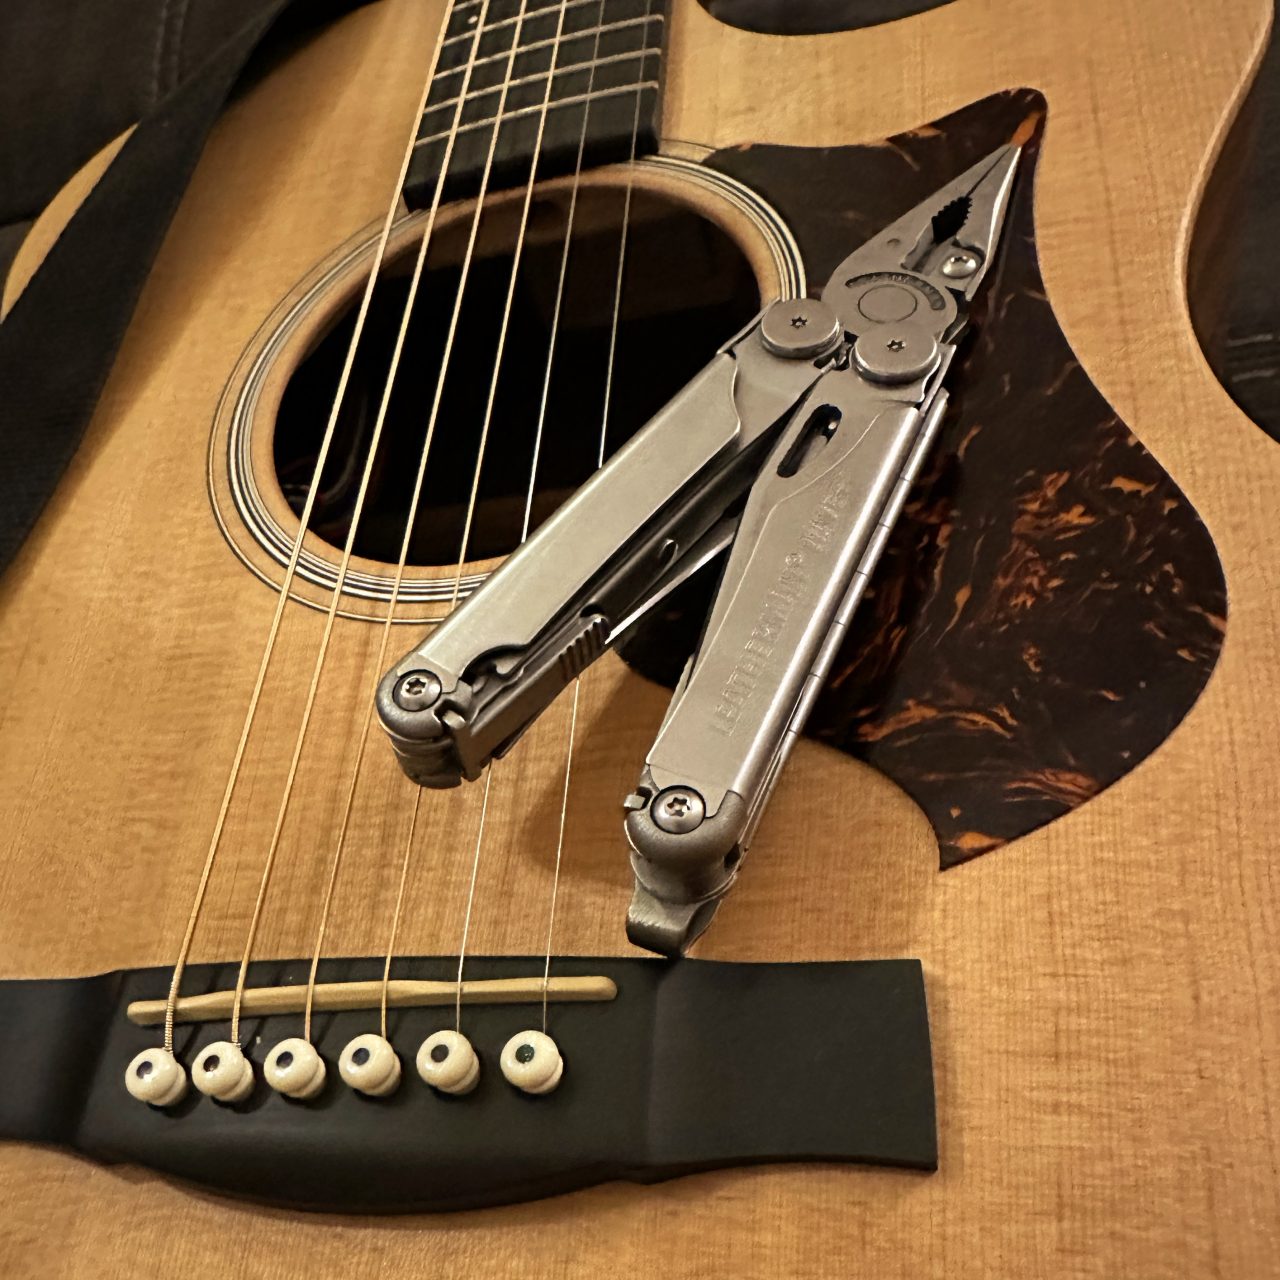 Guitar and multitool